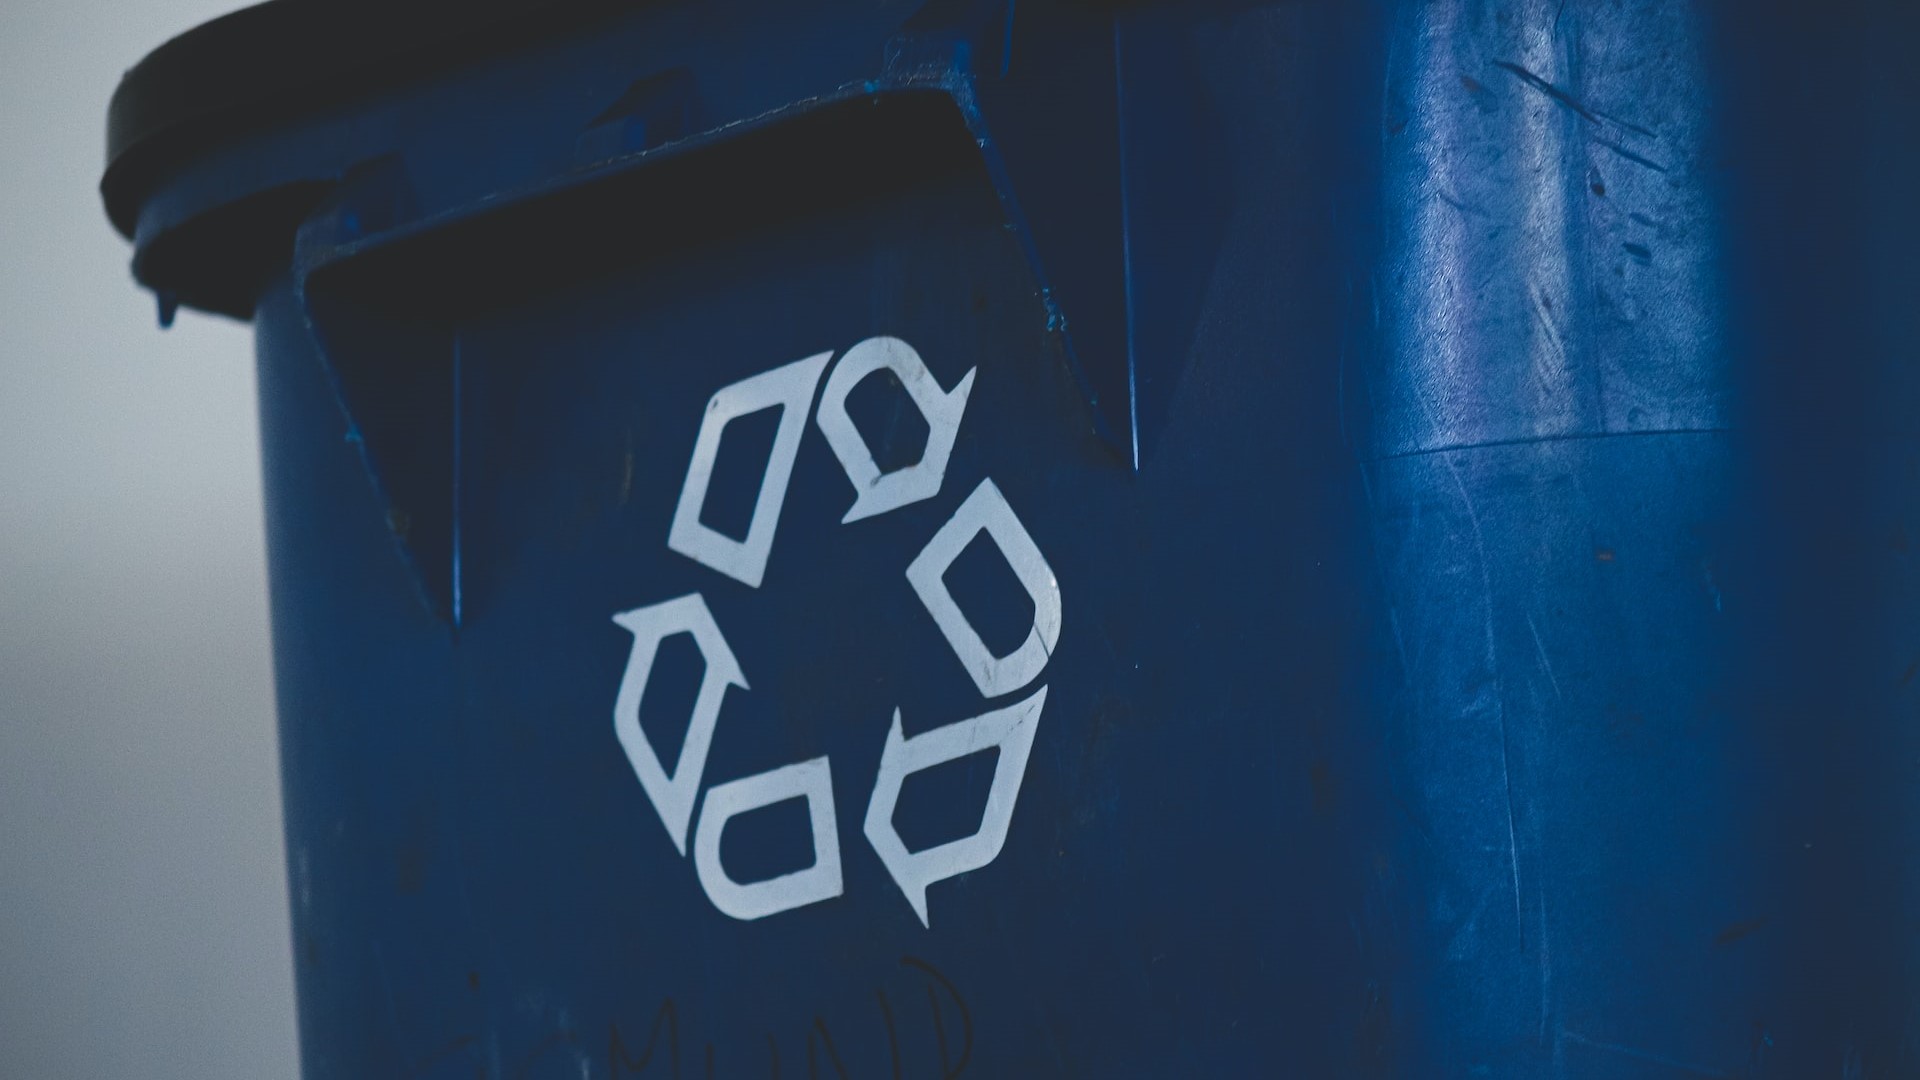 Recycling Symbols and Their Meaning Photo credit: Sigmund on Unsplash